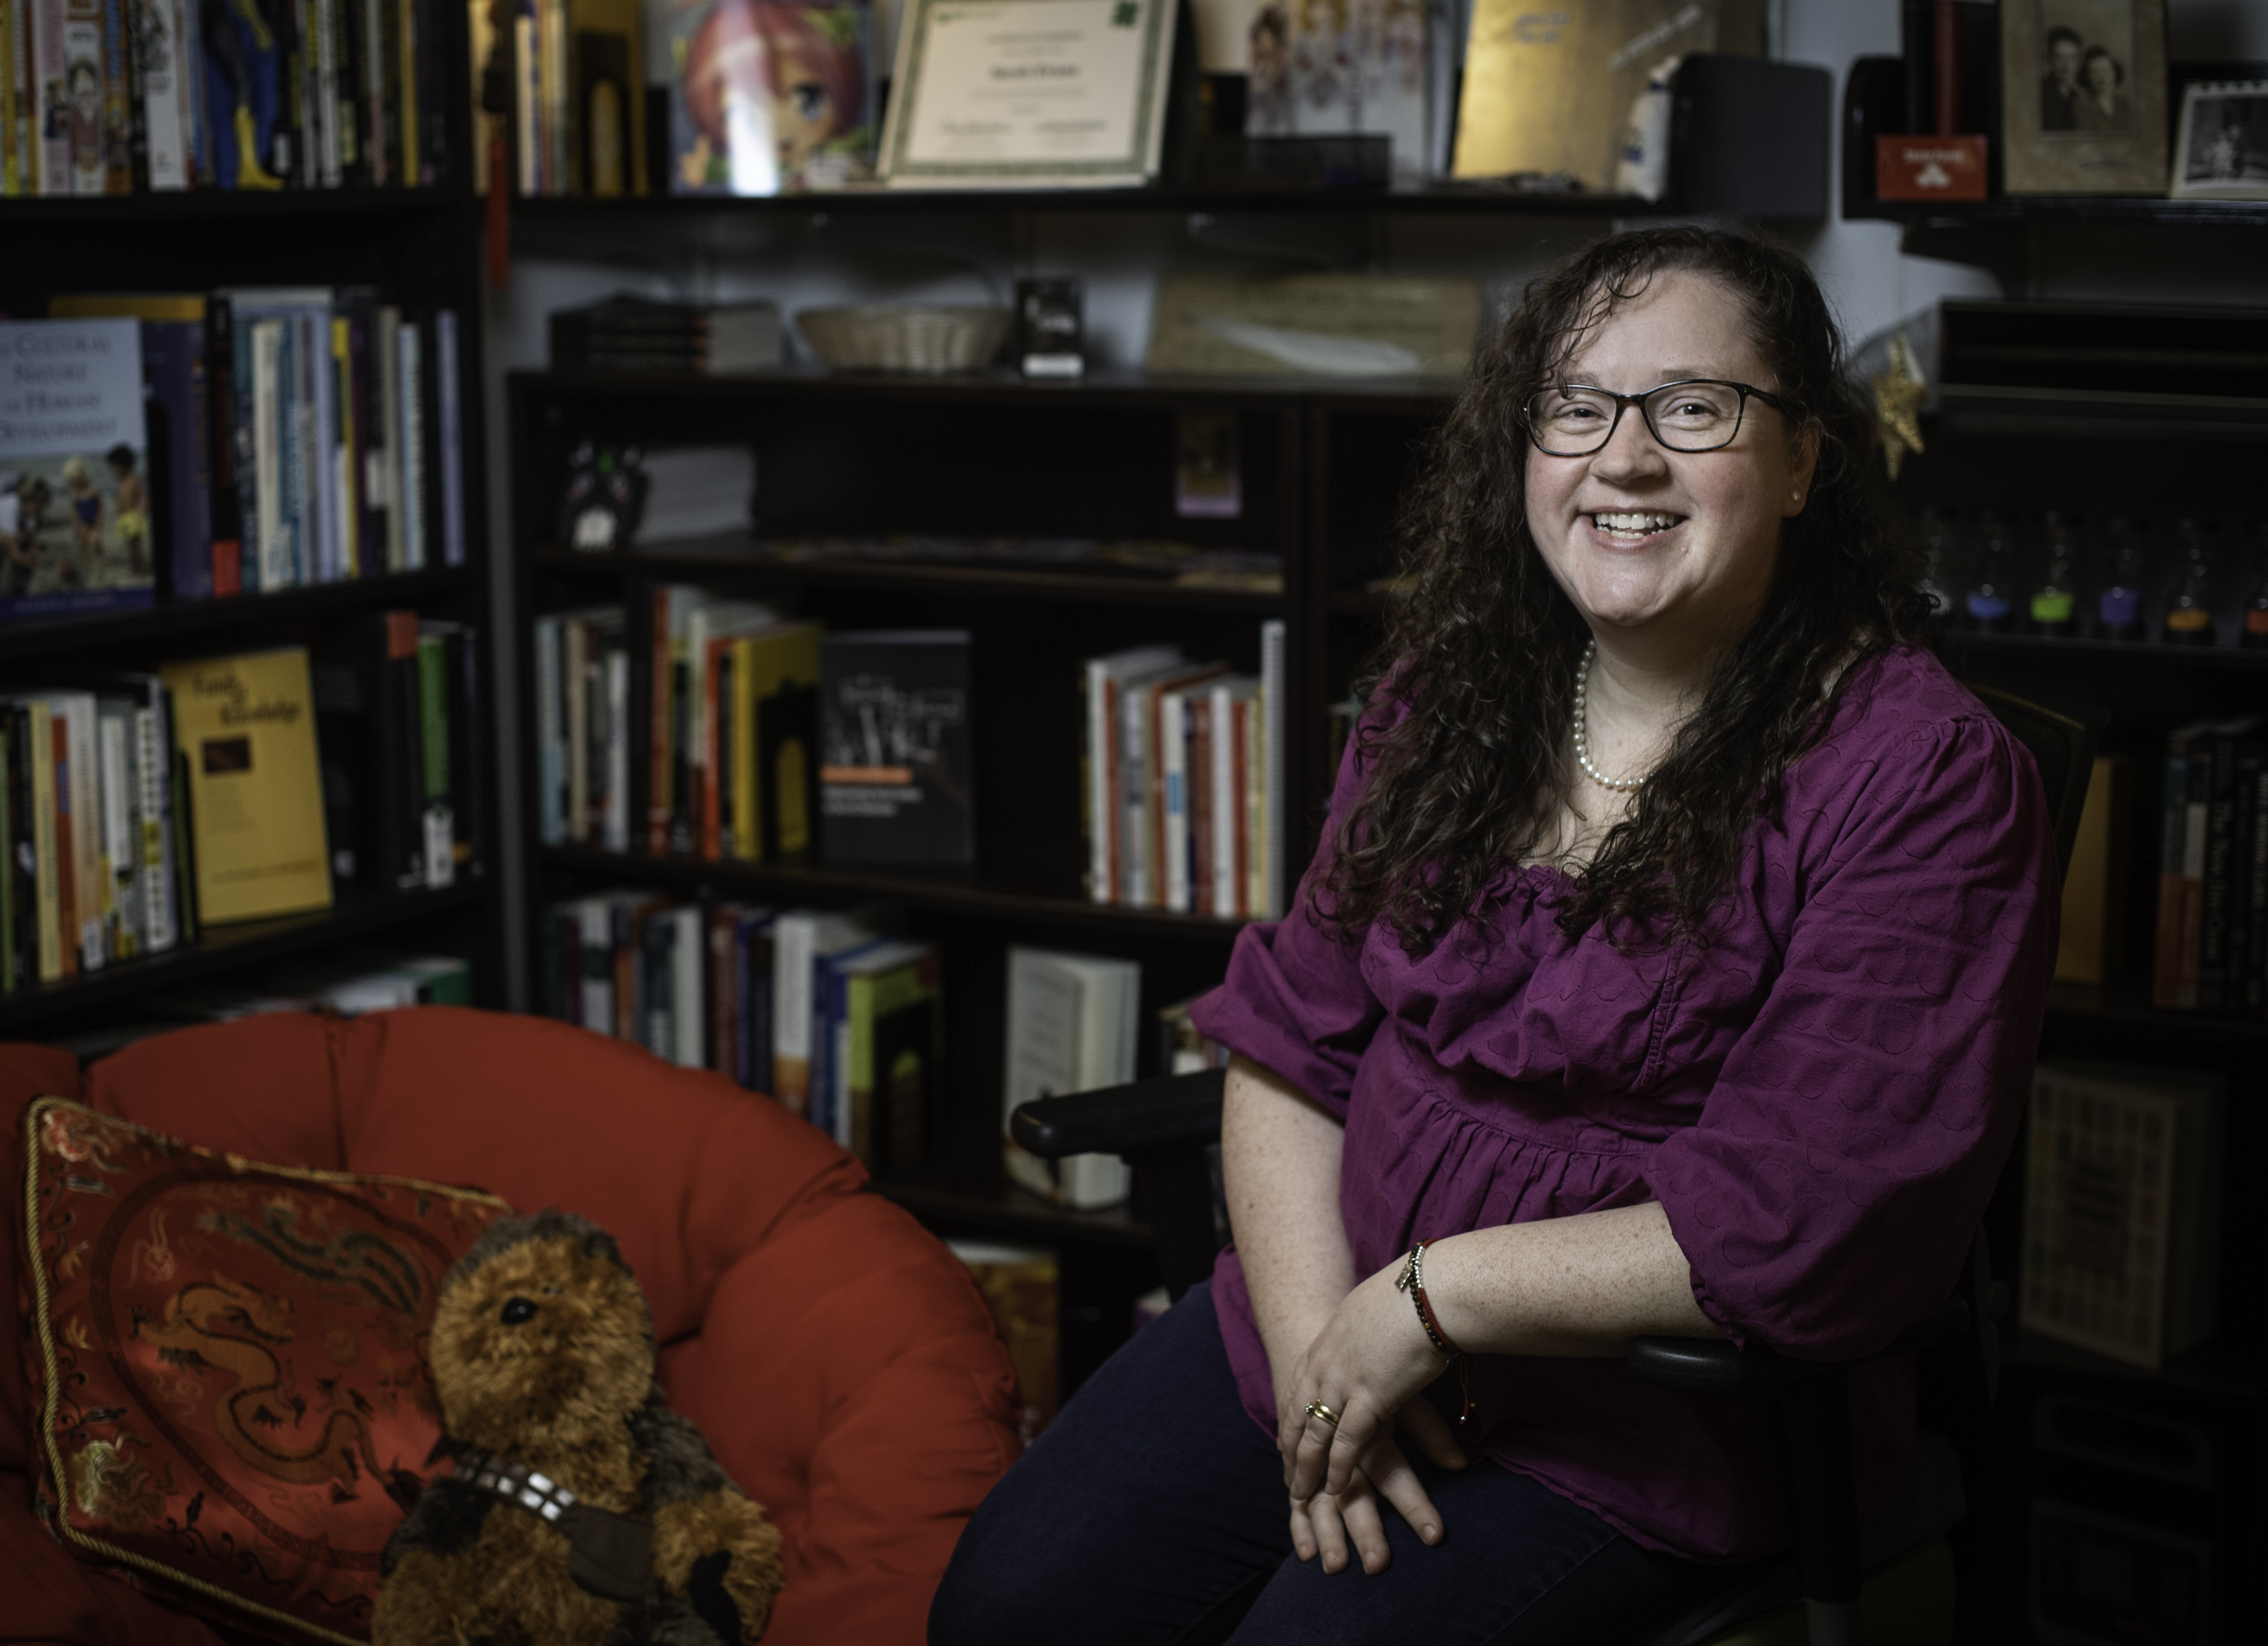 UNT researcher says graphic novels could be valuable tool to improve health literacy